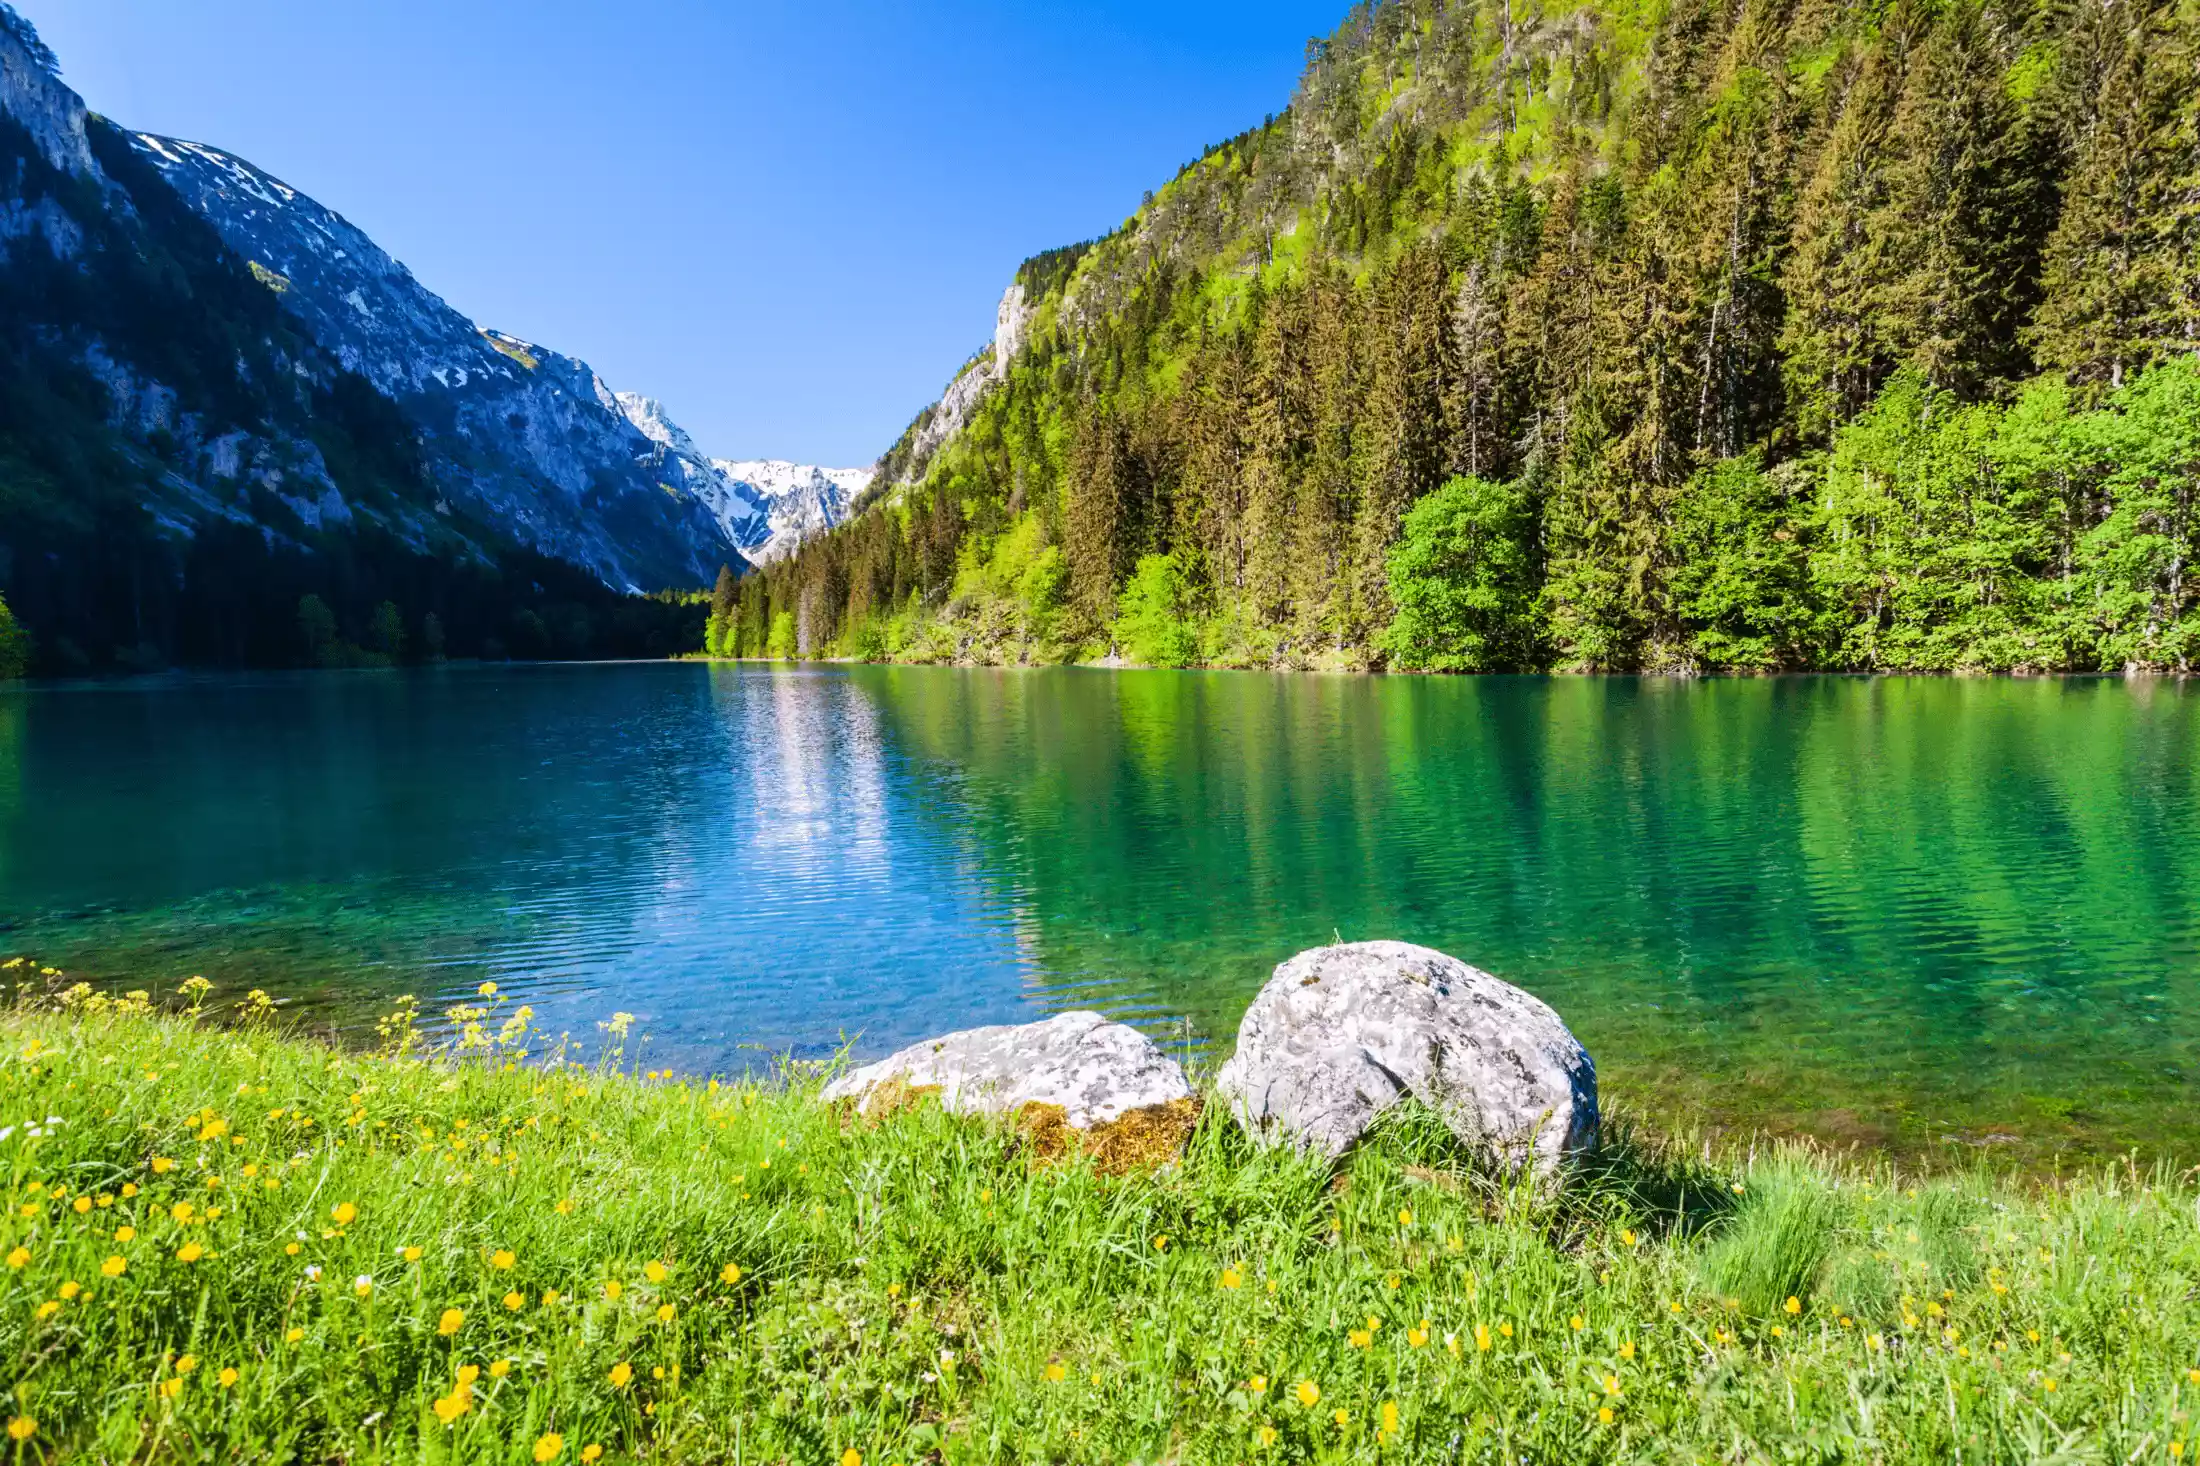 Mountain peaks, lakes and a lush forest – common Durmitor National Park scenery